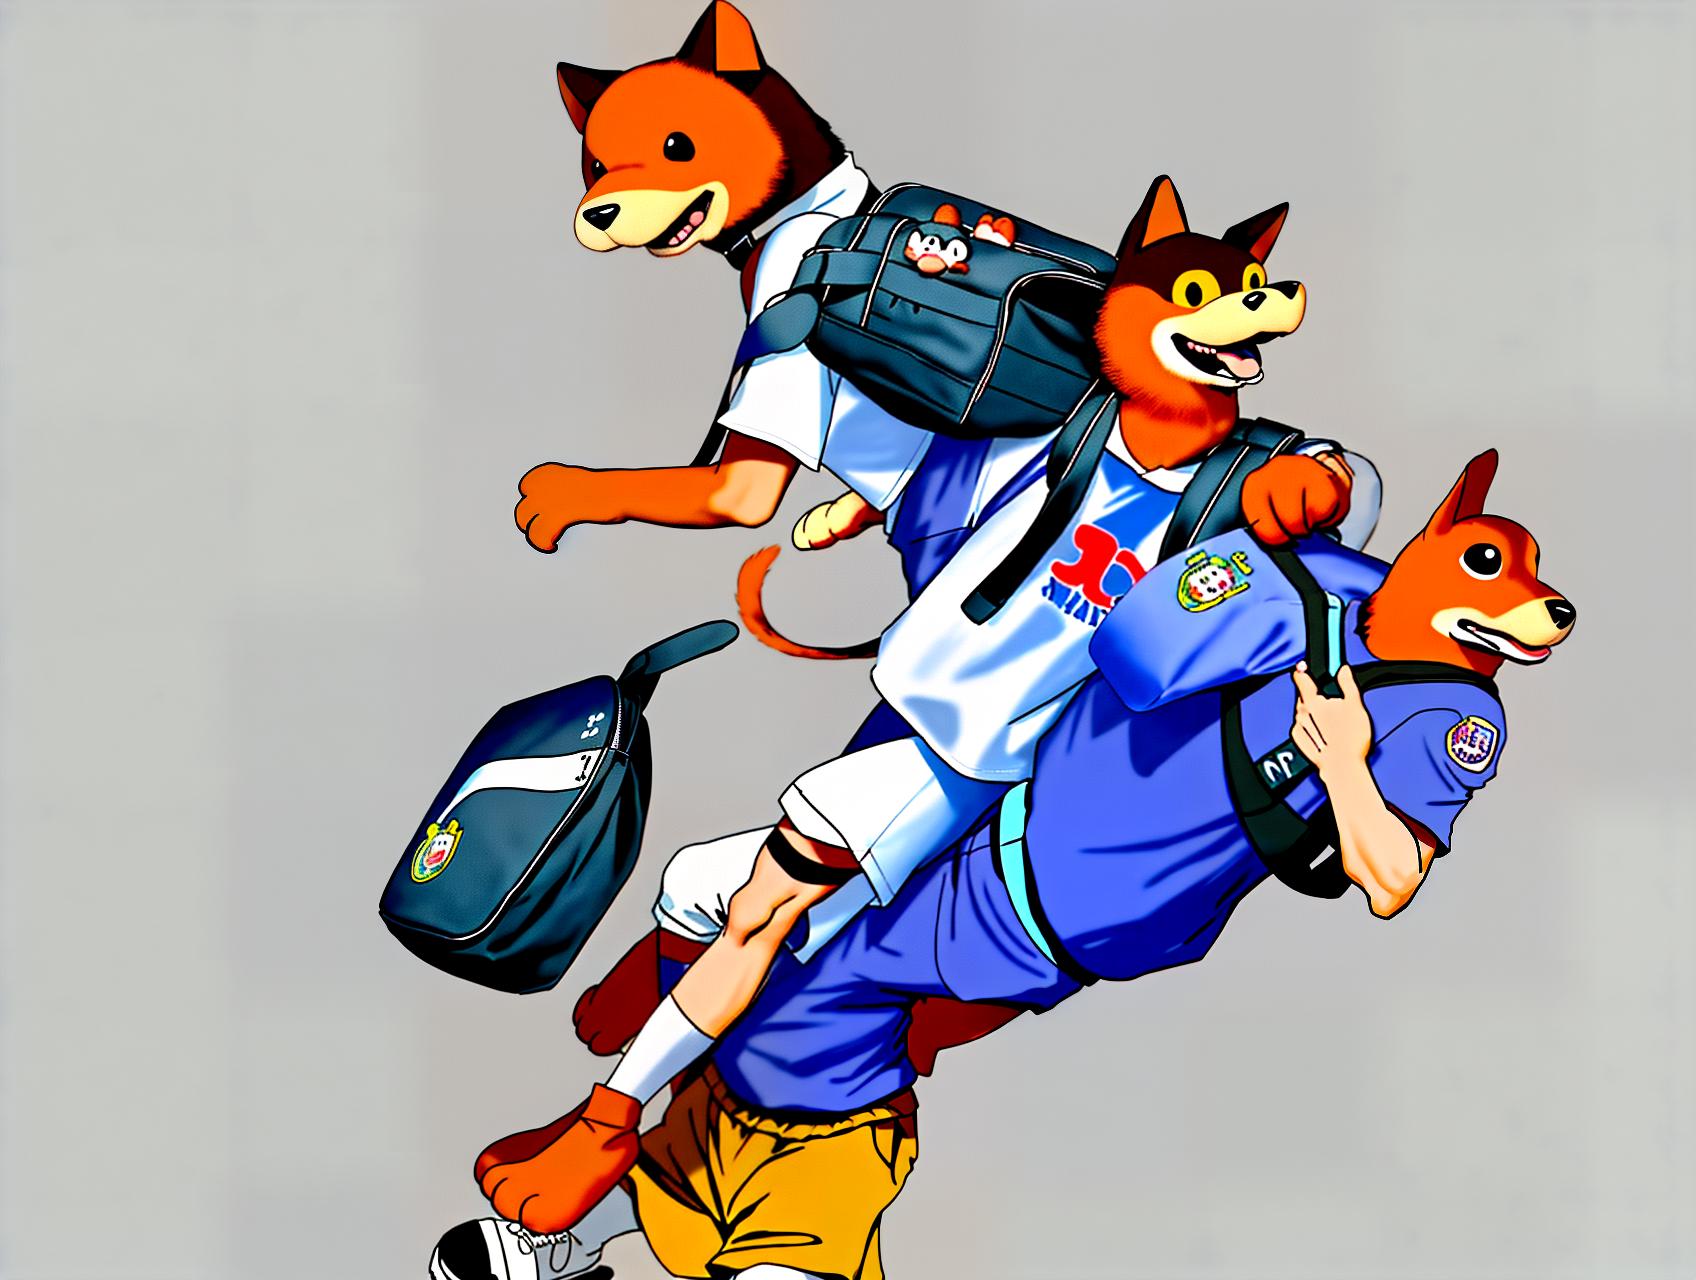  mascot, best quality, an animal mascot, wearing a short-sleeved T-shirt with the number 10 on it, carrying a schoolbag